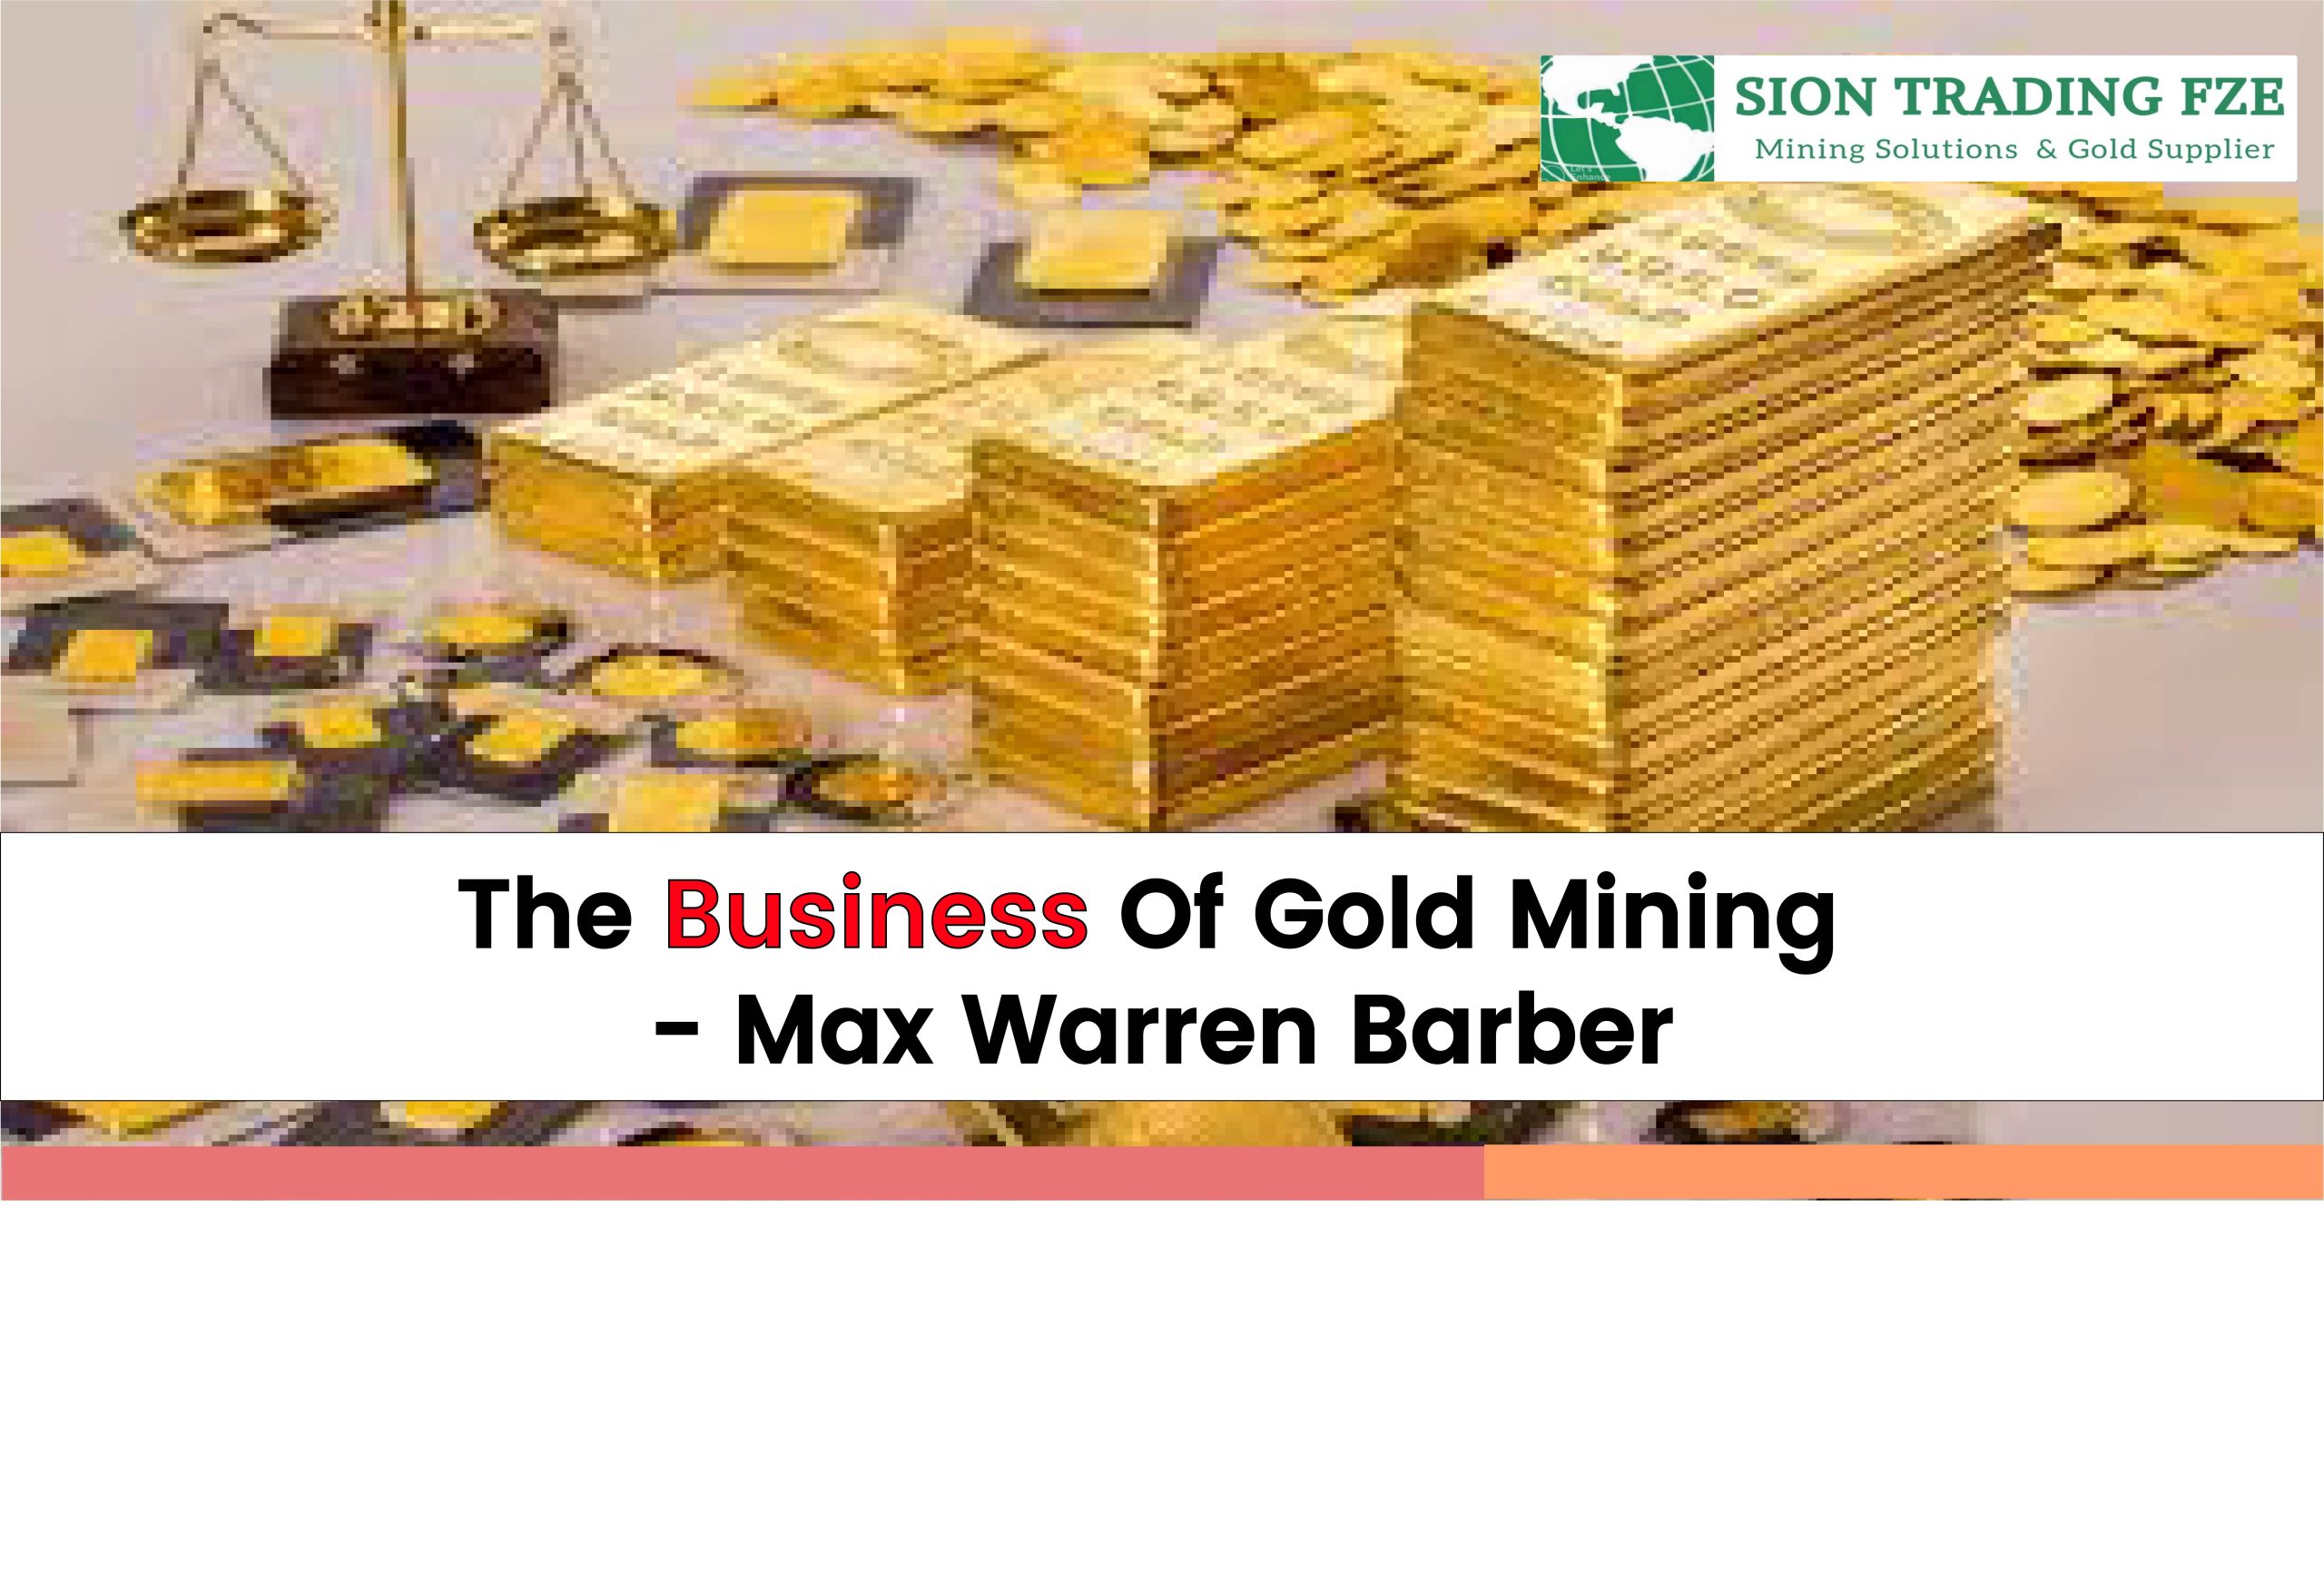 sion trading fze Max warren barber gold scam